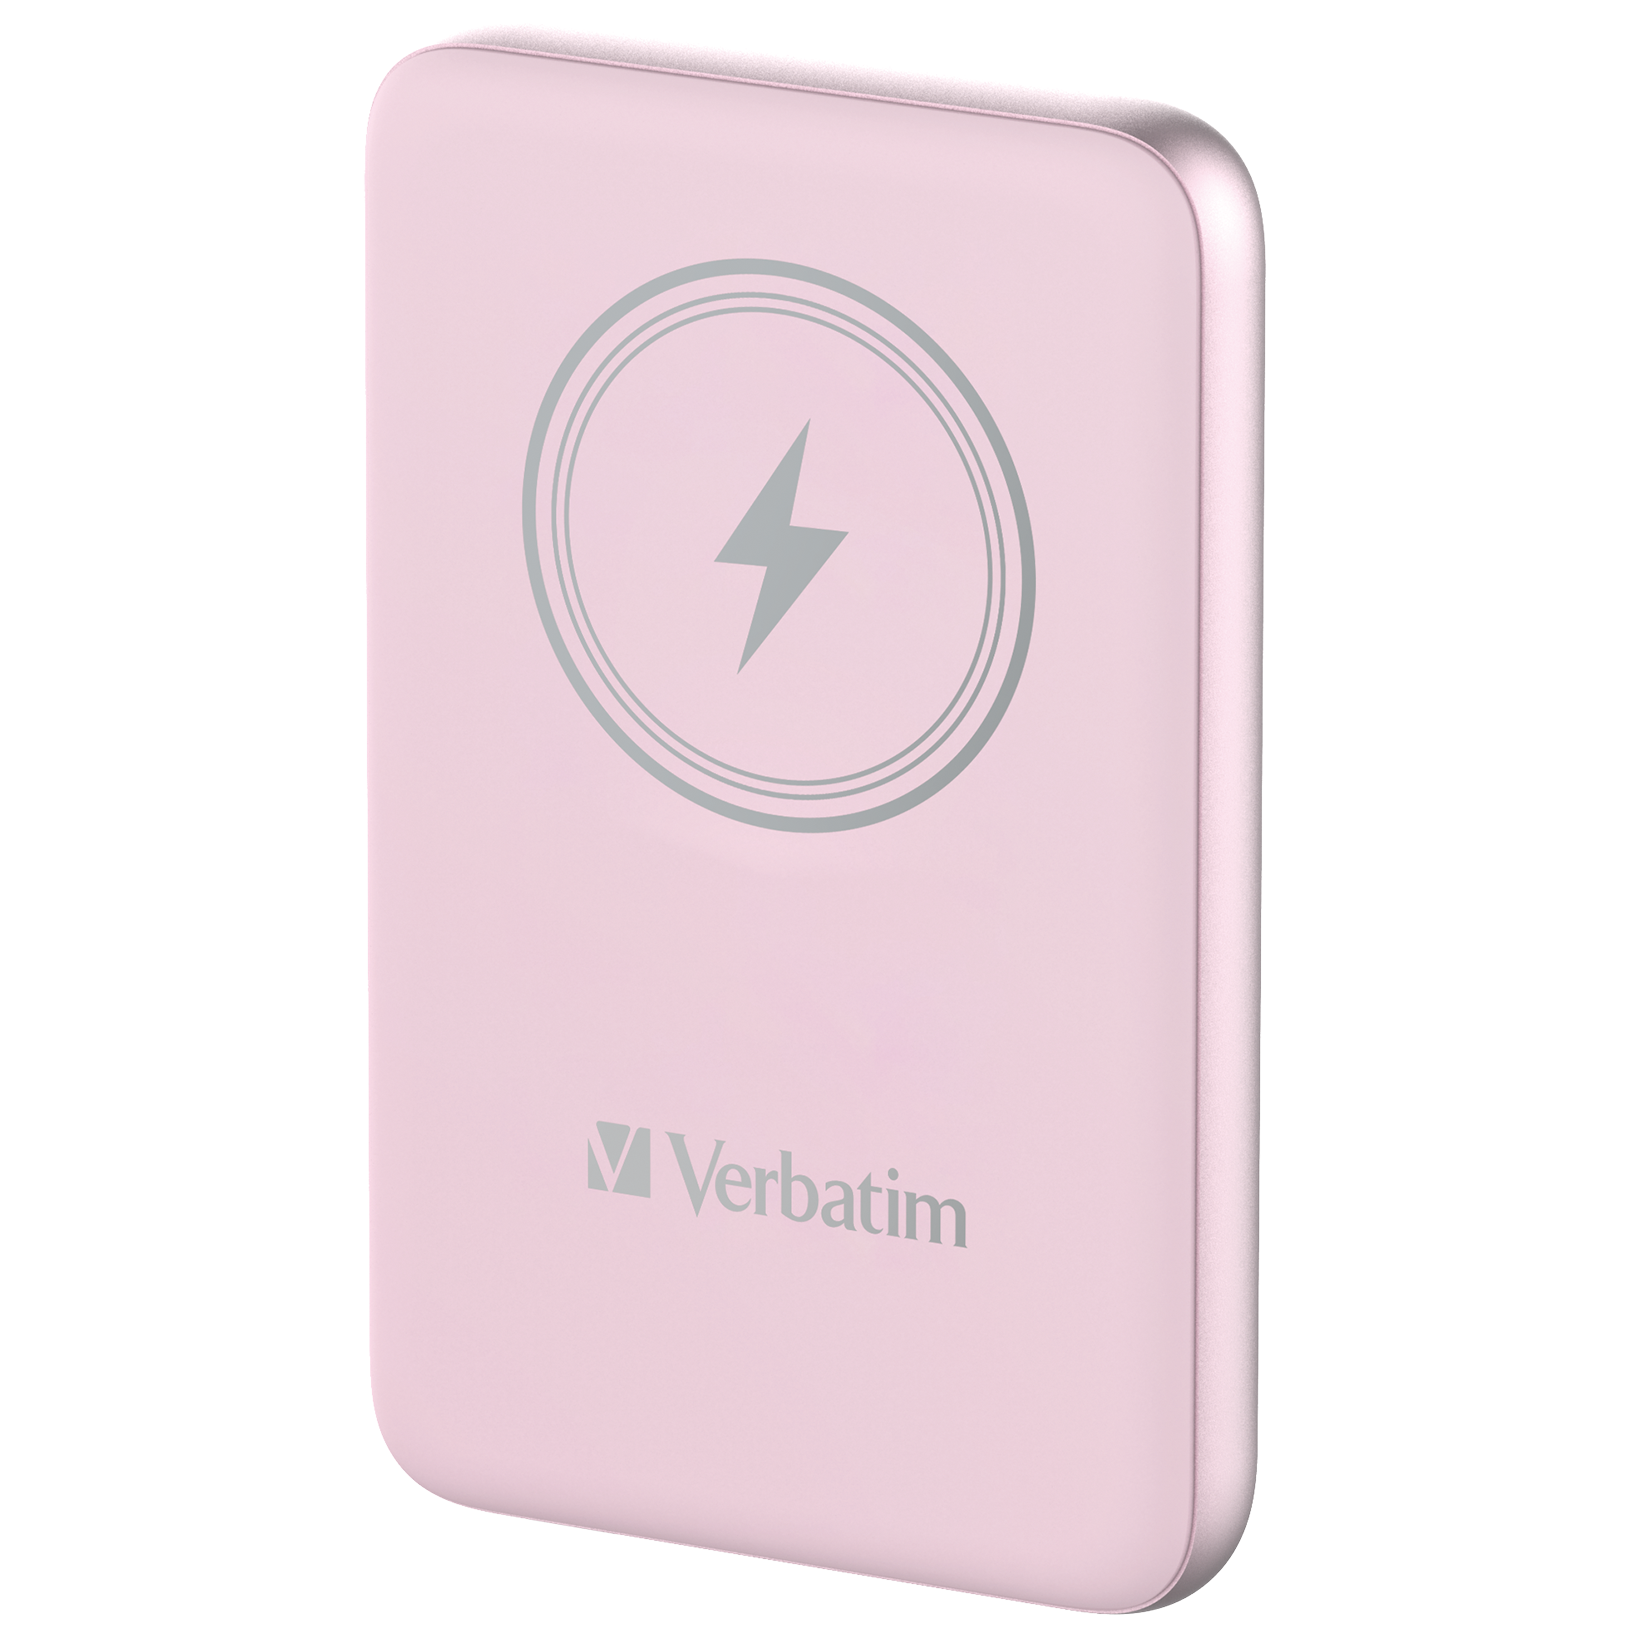 Charge 'n' Go Magnetic Wireless Power Bank 10000mAh Pink